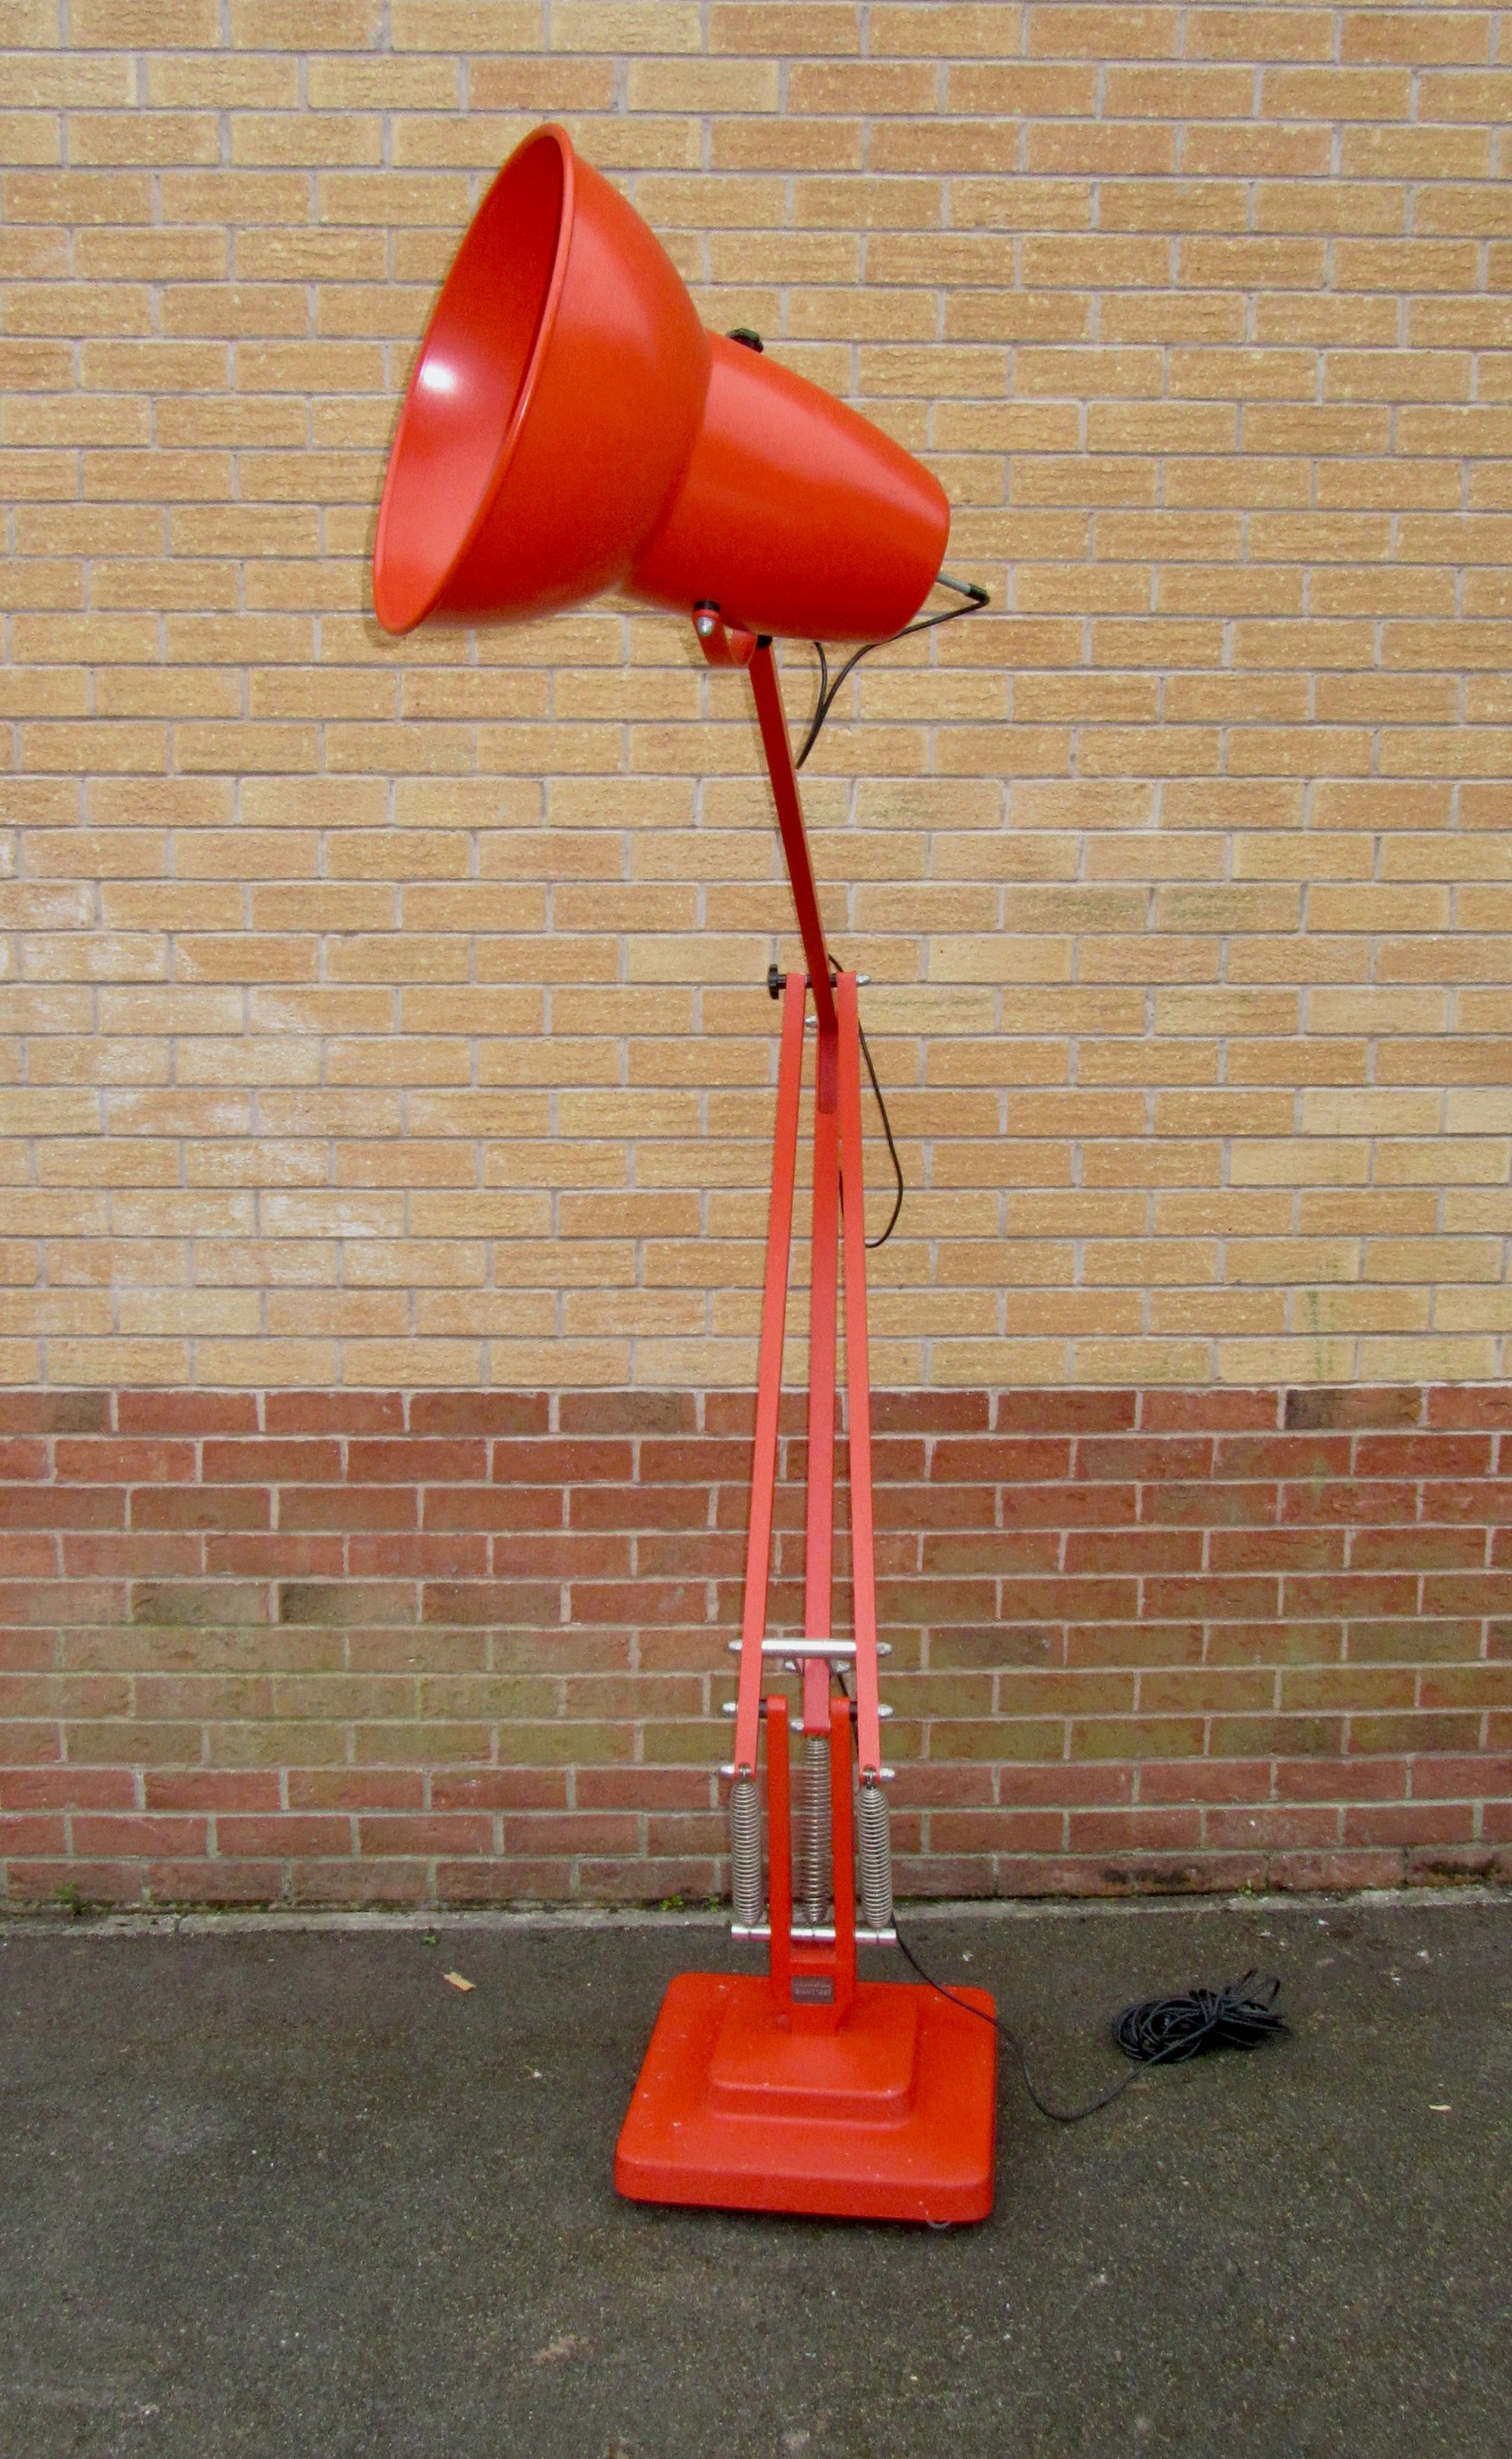 Giant Indoor Anglepoise 1227 Red Floor Lamp With Black Flex